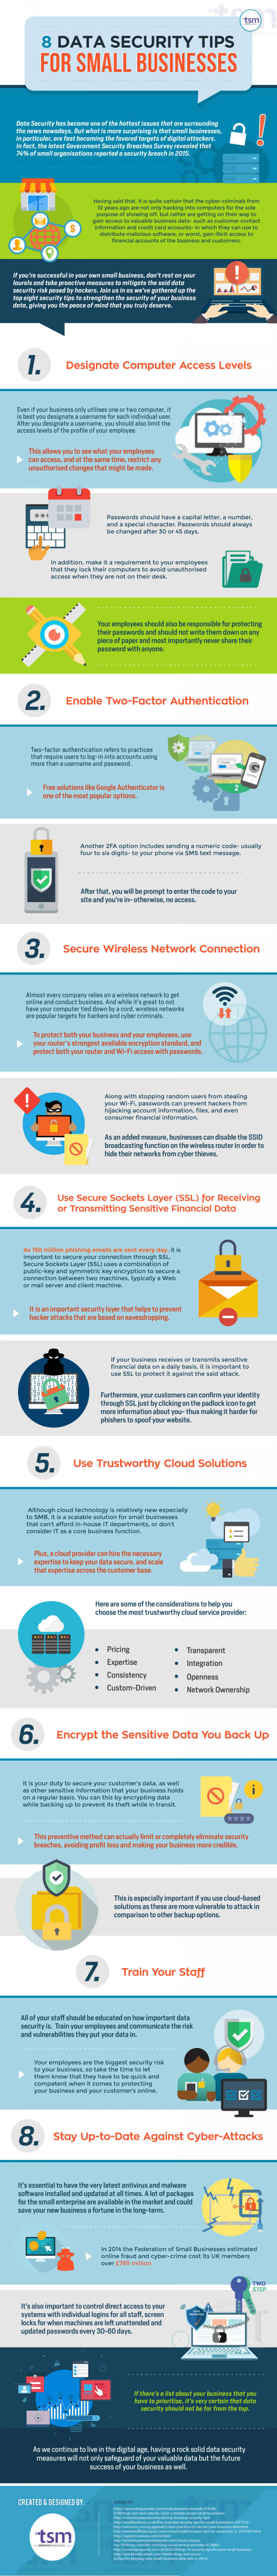 8 Data Security Tips for Small Businesses 1